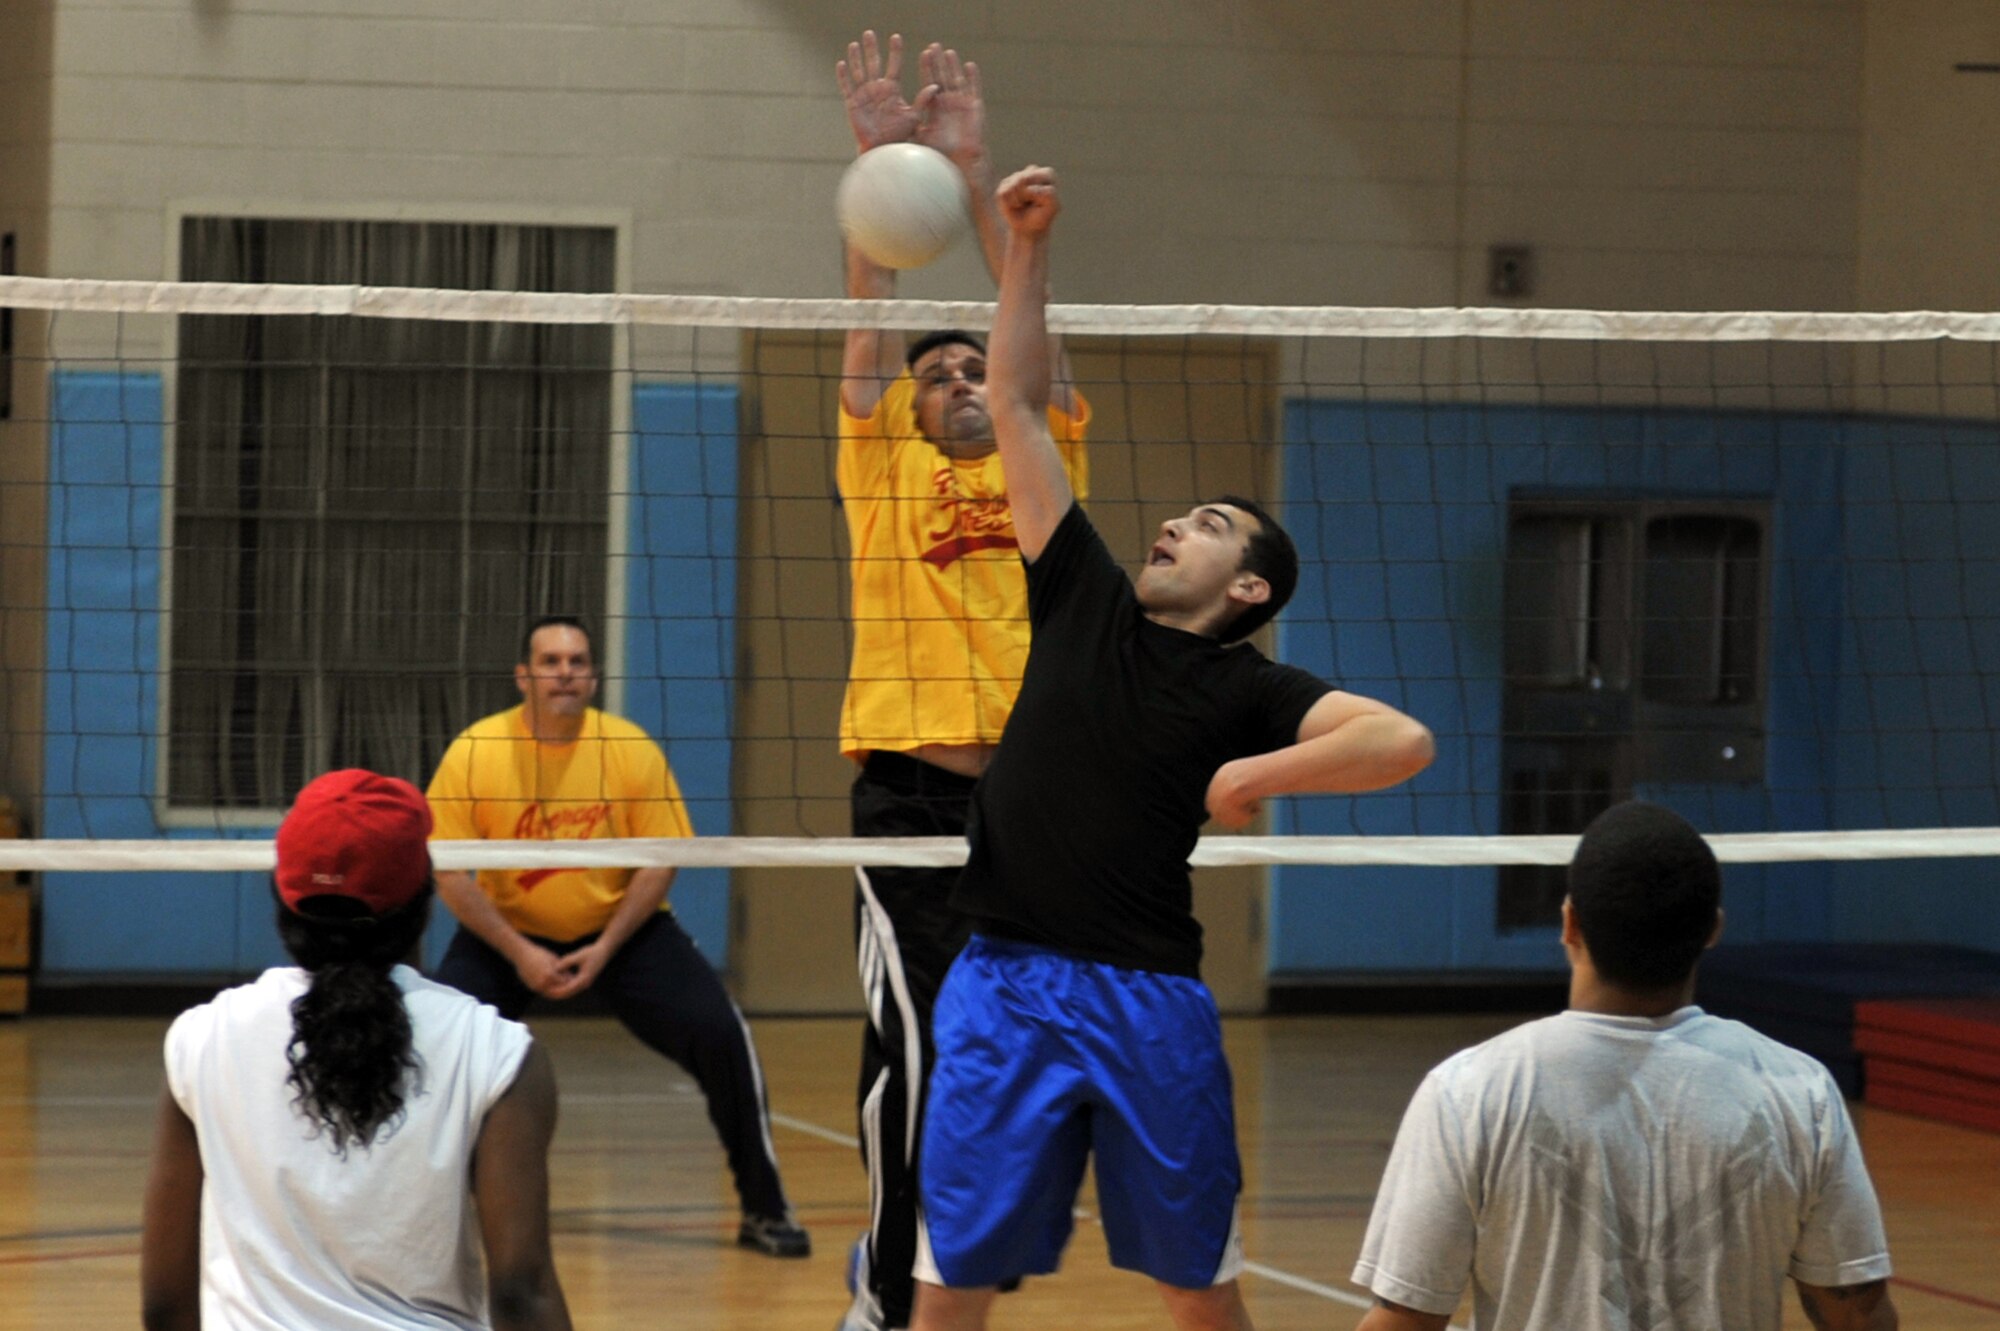 Command Chief Master Sergeant Scott Delveau (left), 7th Air Force command chief, blocks a spike from Senior Airman Jeffery Bowen, 51st Maintenance Squadron member, in the Battle of the Tiers volleyball tournament at the Osan Fitness Center on Osan Air Base, Republic of Korea, March 29, 2013. The Chiefs Group eliminated the Osan Junior Enlisted Council in the tournament. (U.S. Air Force photo/Senior Airman Alexis Siekert)